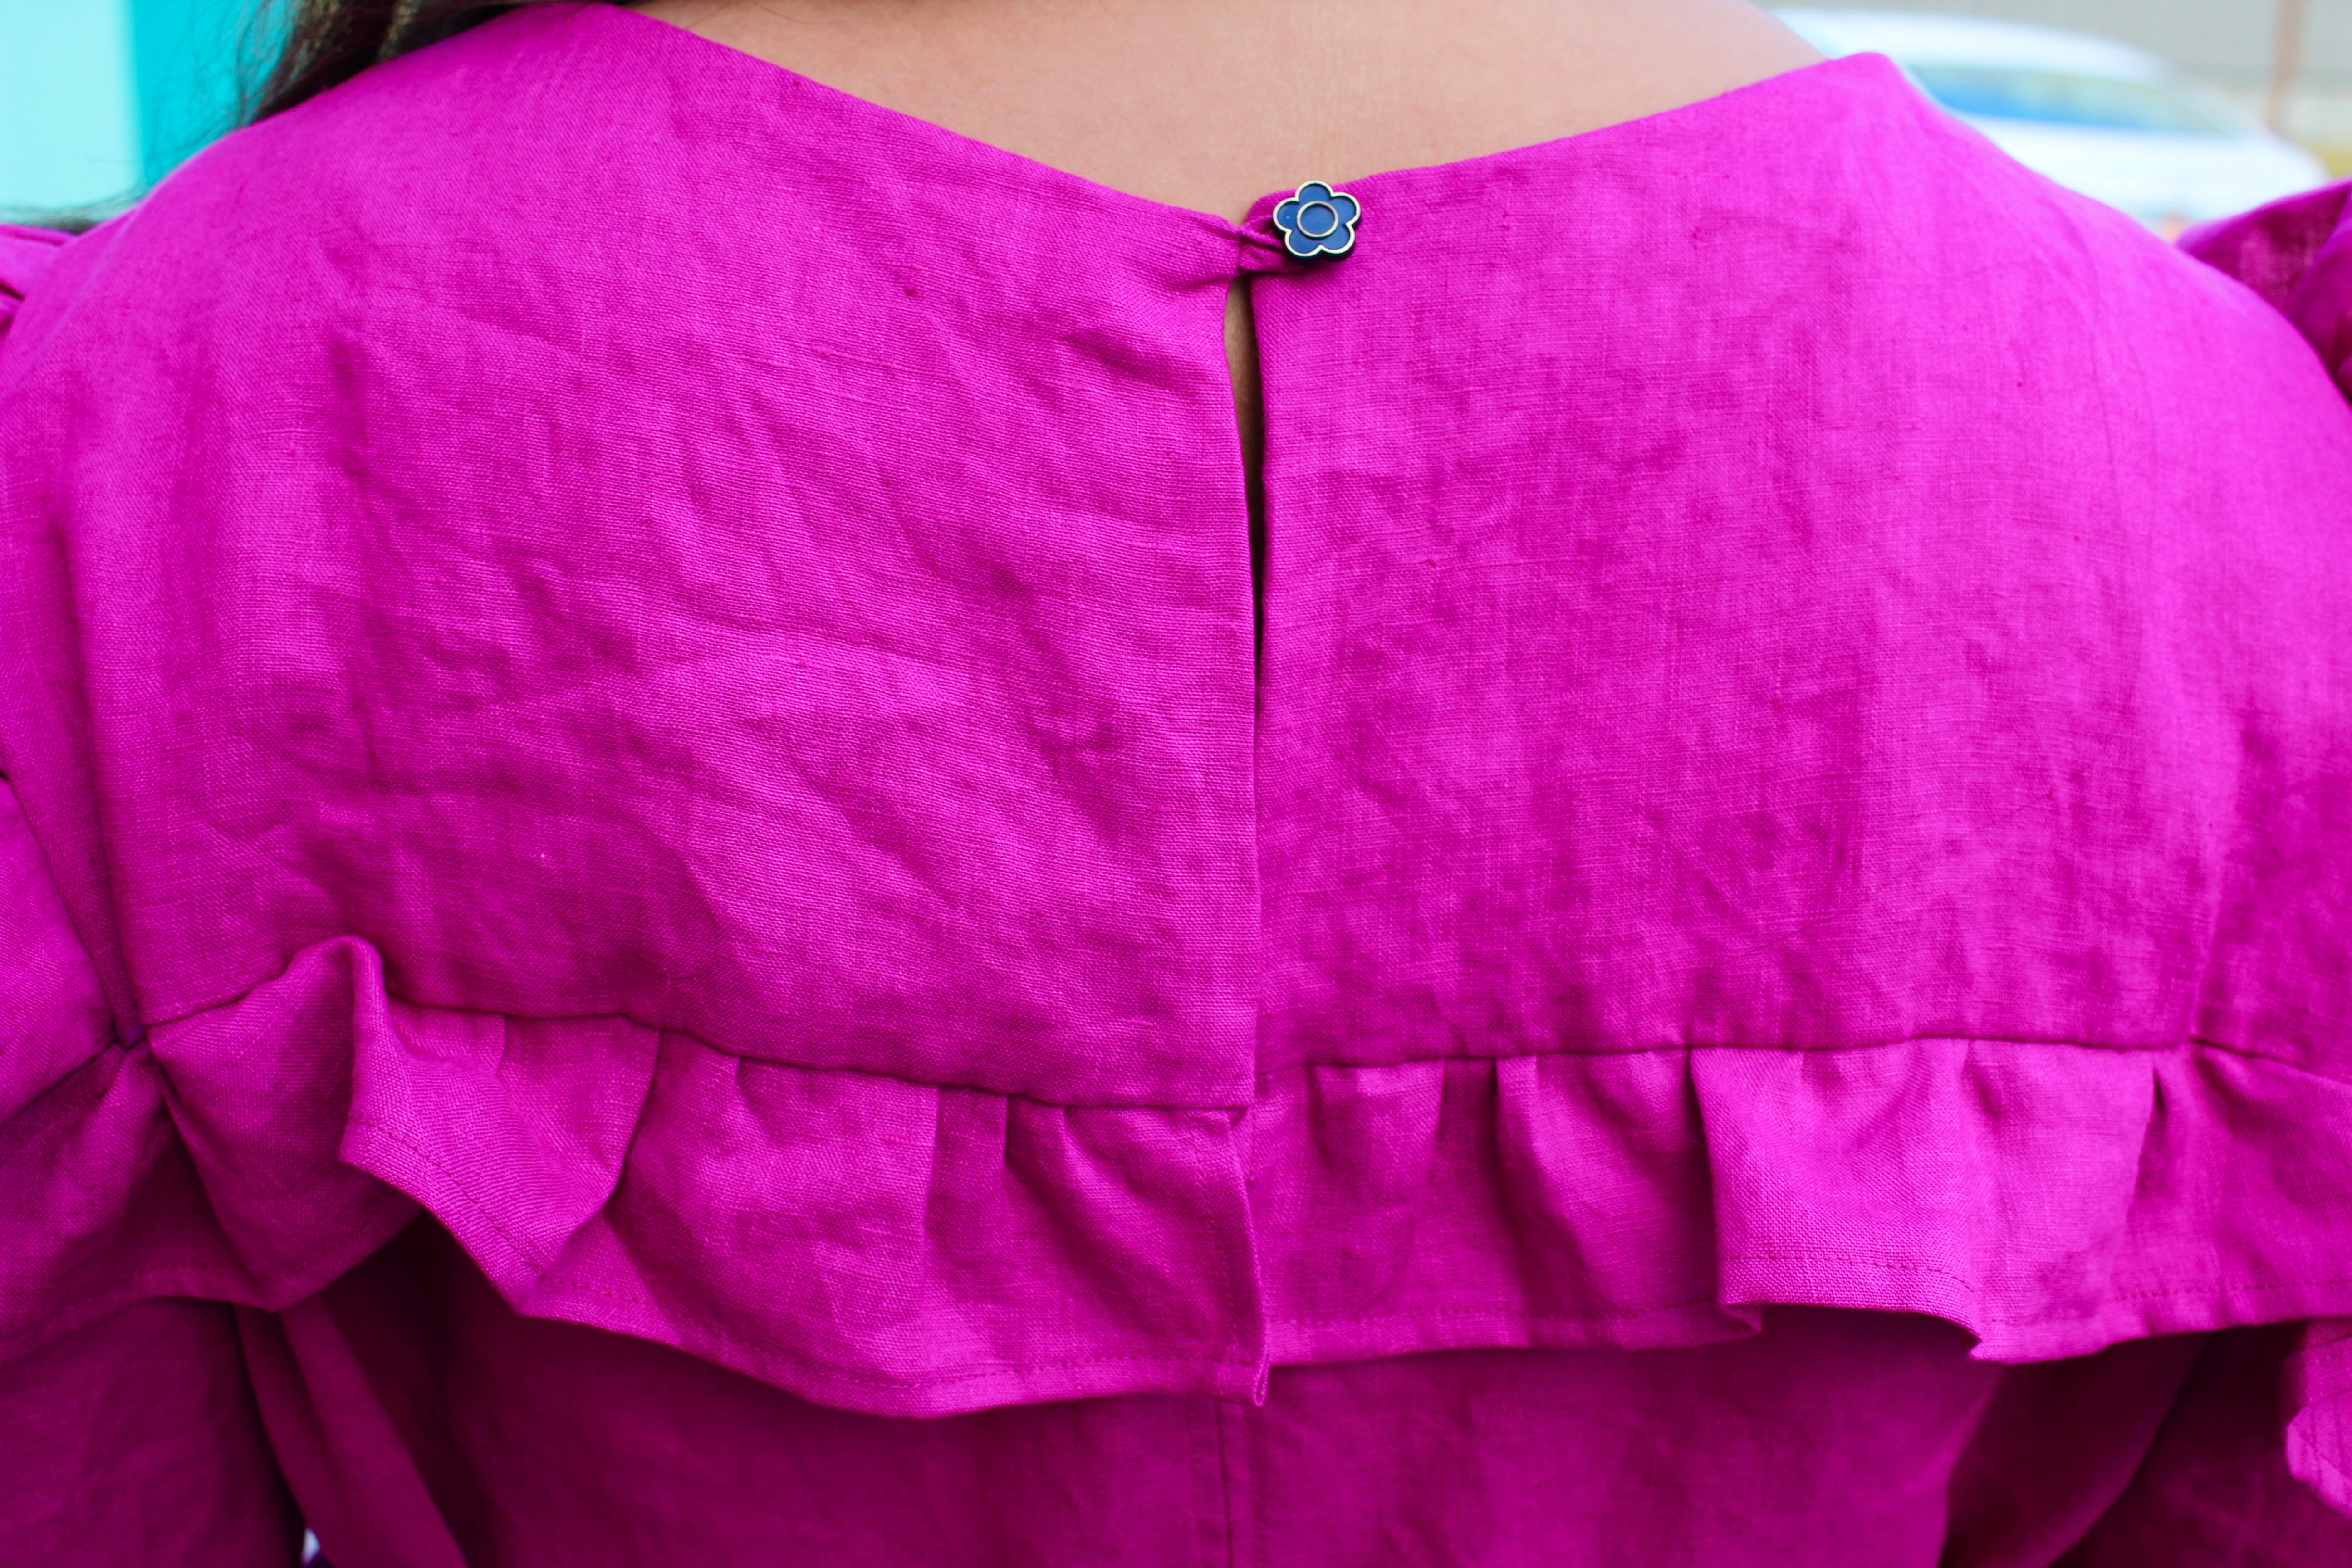 Close up detail of the back closure of Romy's handmade pink dress.  This image shows the metal flower button and loop closure for the back of the dress